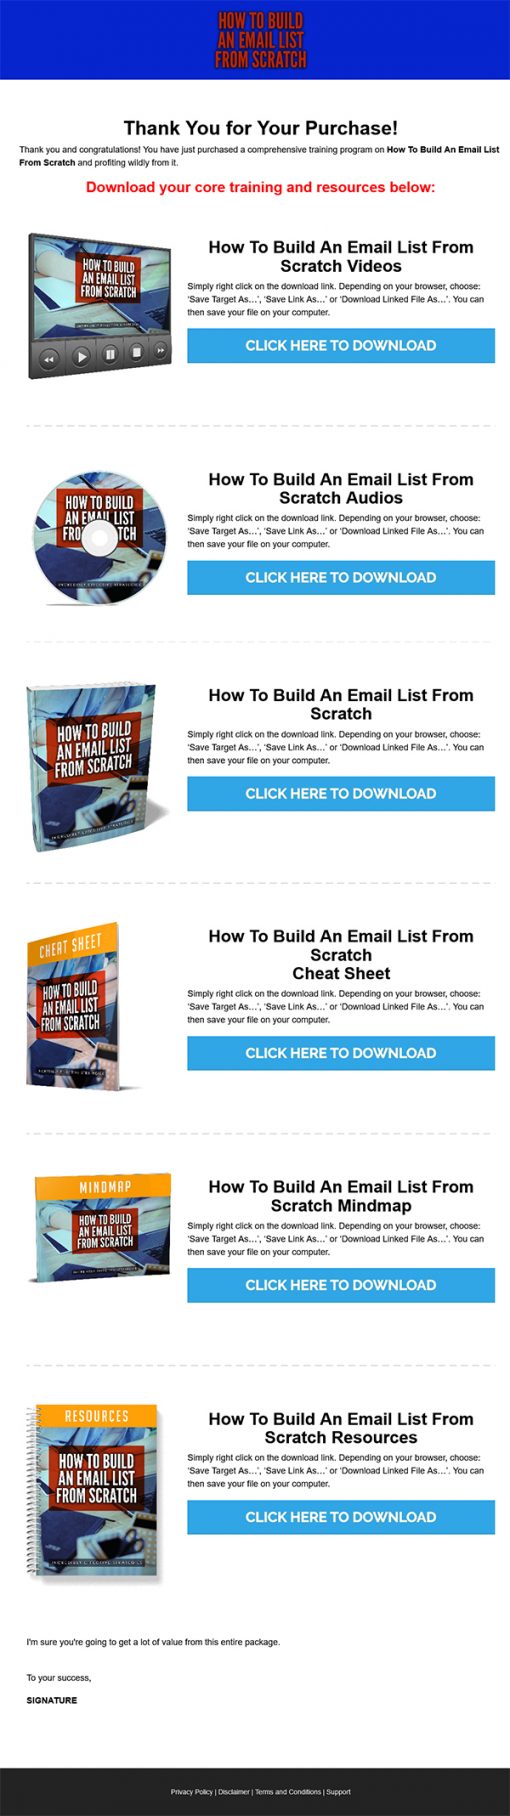 How to Build an Email List from Scratch Ebook and Videos MRR